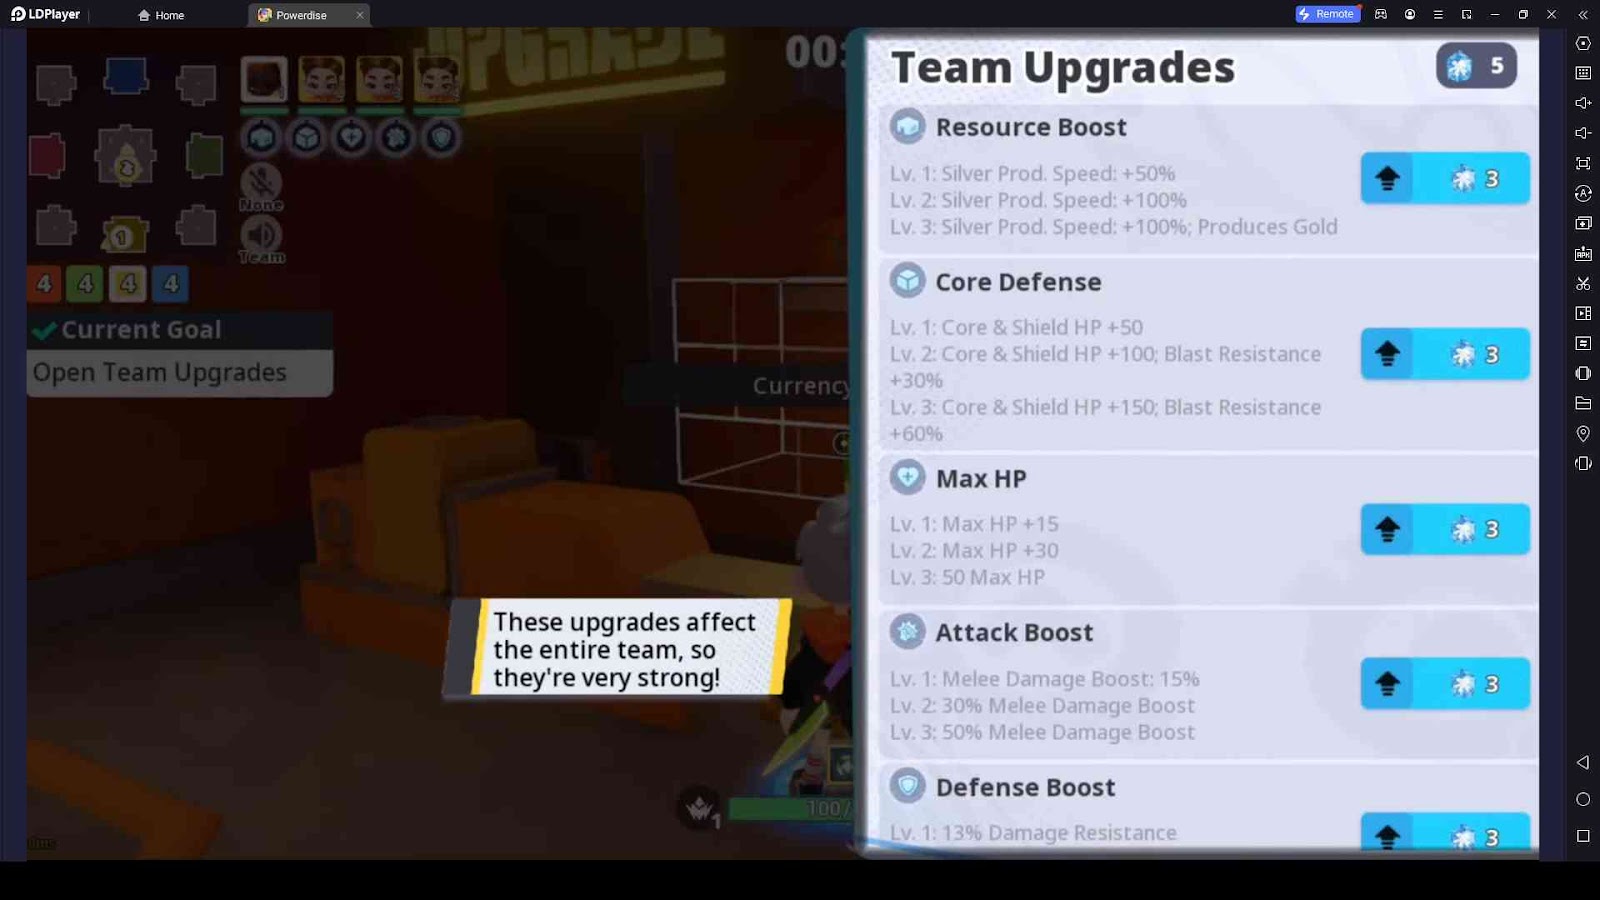 Strengthen the Team with Team Upgrades